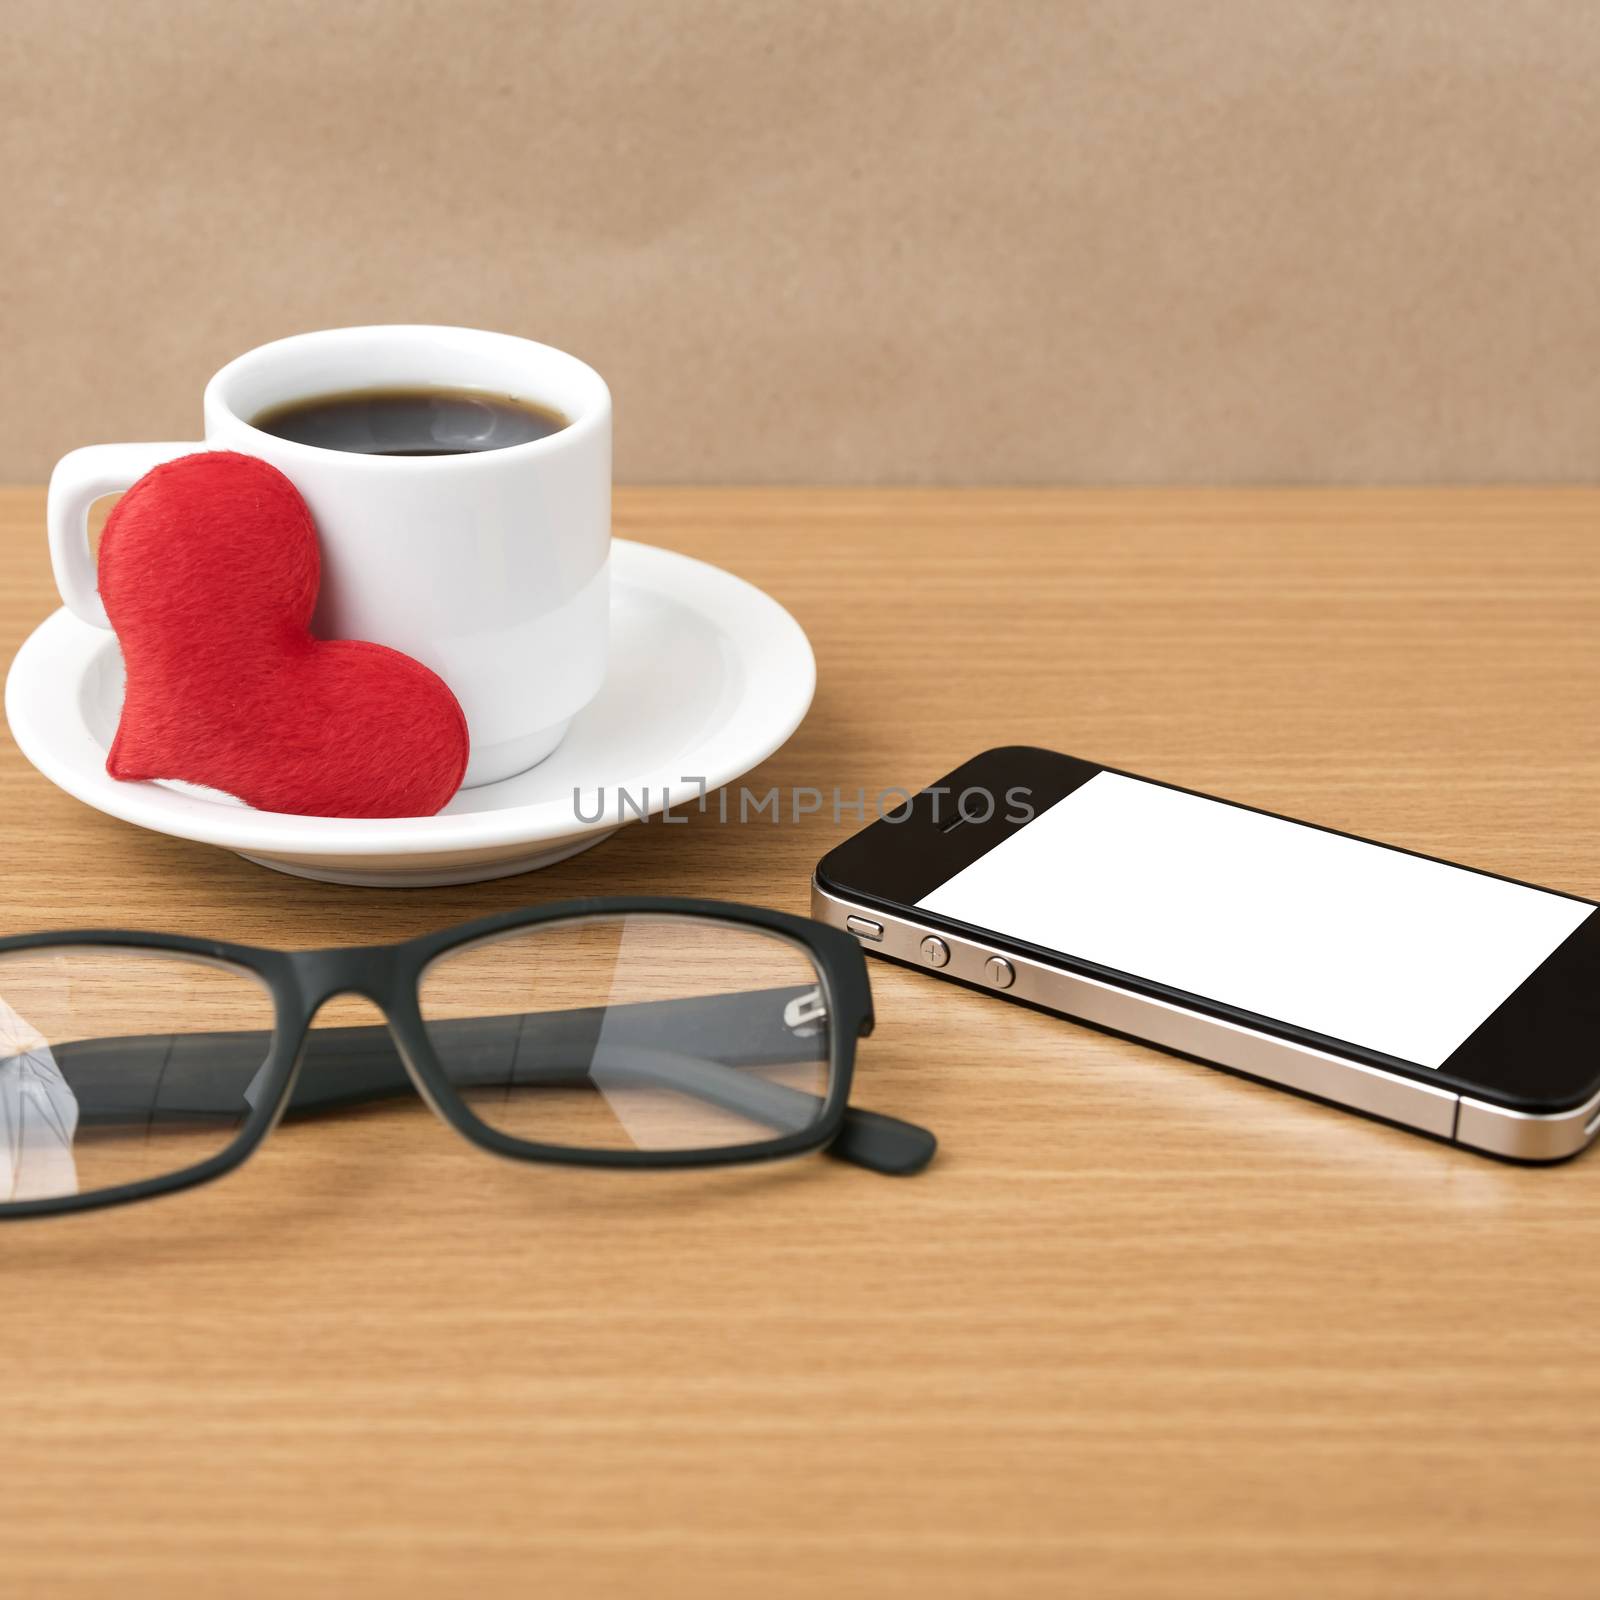 coffee,phone,eyeglasses and heart on wood table background